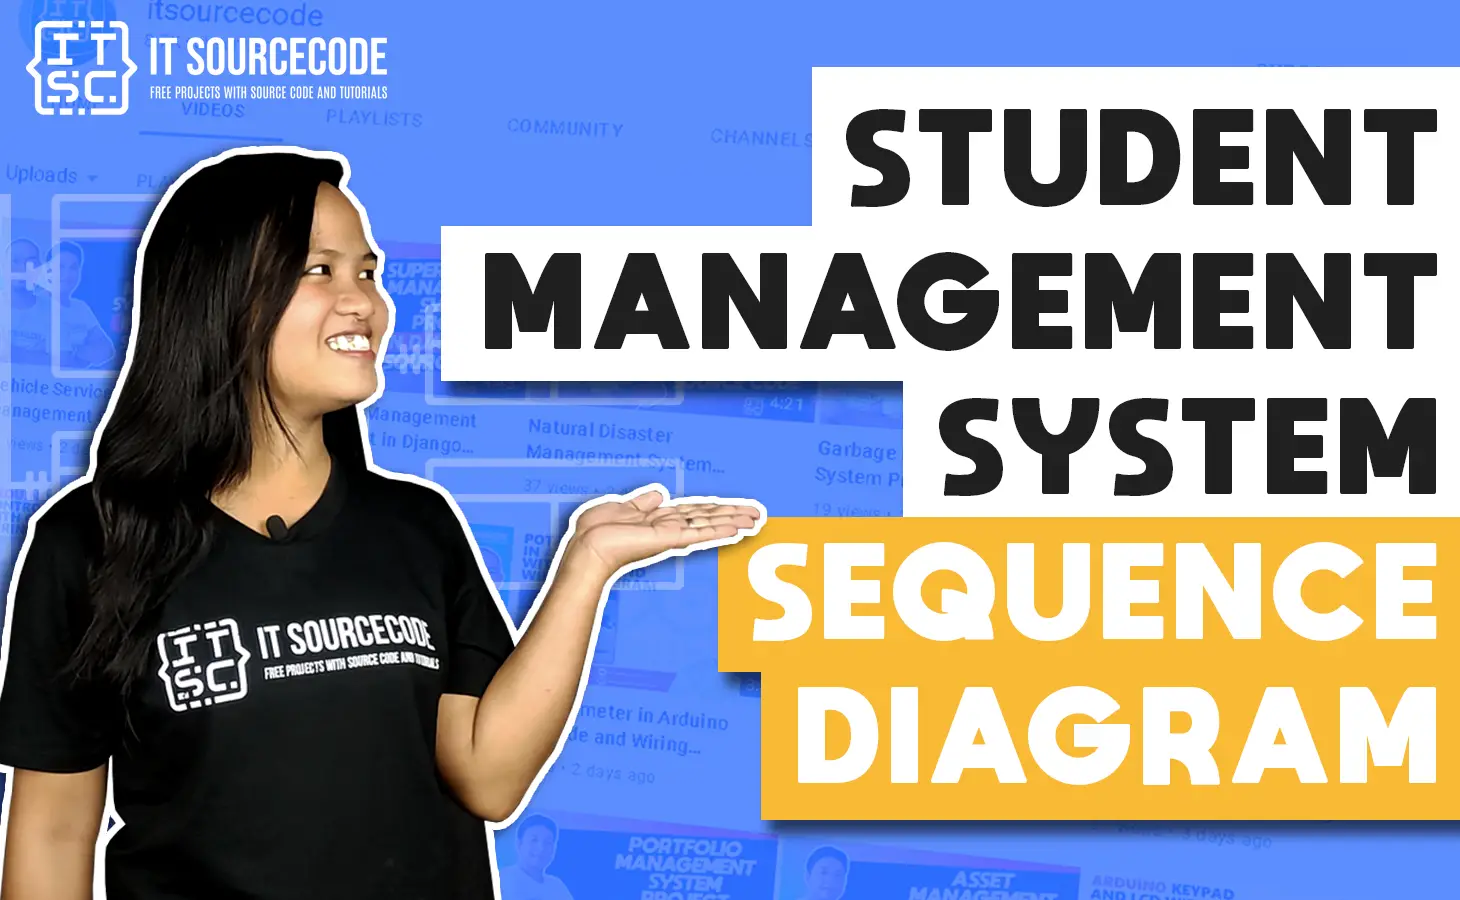 Sequence Diagram for Student Management System